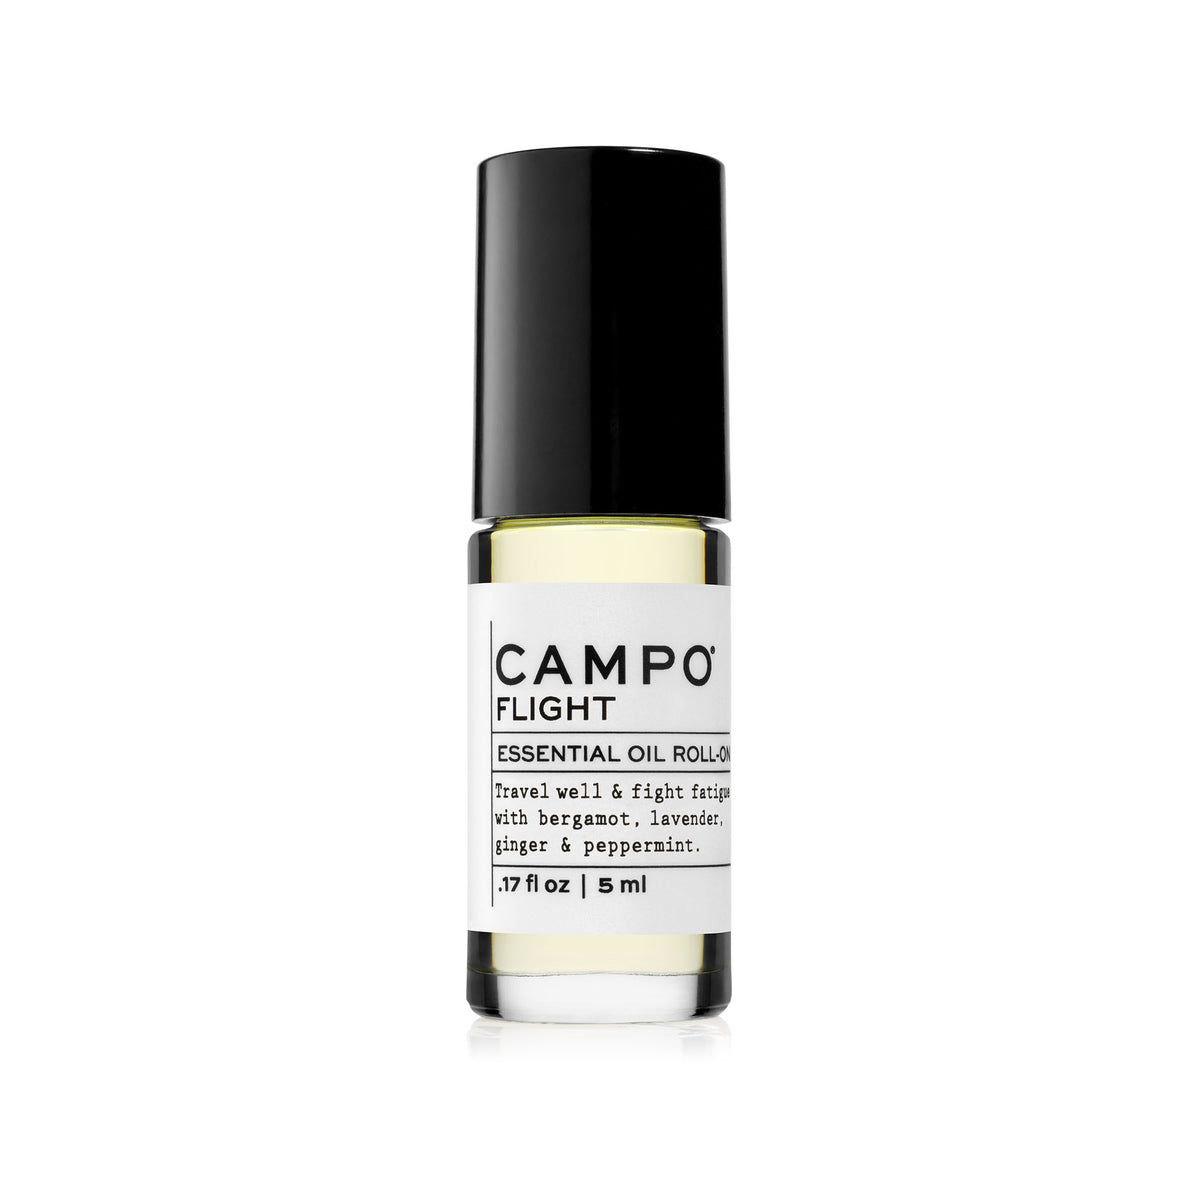 Campo Beauty Essential Oil FLIGHT Blend Roll-On that in 5 ml. Dispels feelings of stress during flight and restores a sense of vitality and alertness in any time zone. Feel grounded and connected to your mind and body with this 100% pure essential oil roll-on blend of Bergamot, Lavender, Peppermint &amp; Ginger. Pre-blended with 100% natural beauty carrier oils, so it’s jet-set and ready to roll.